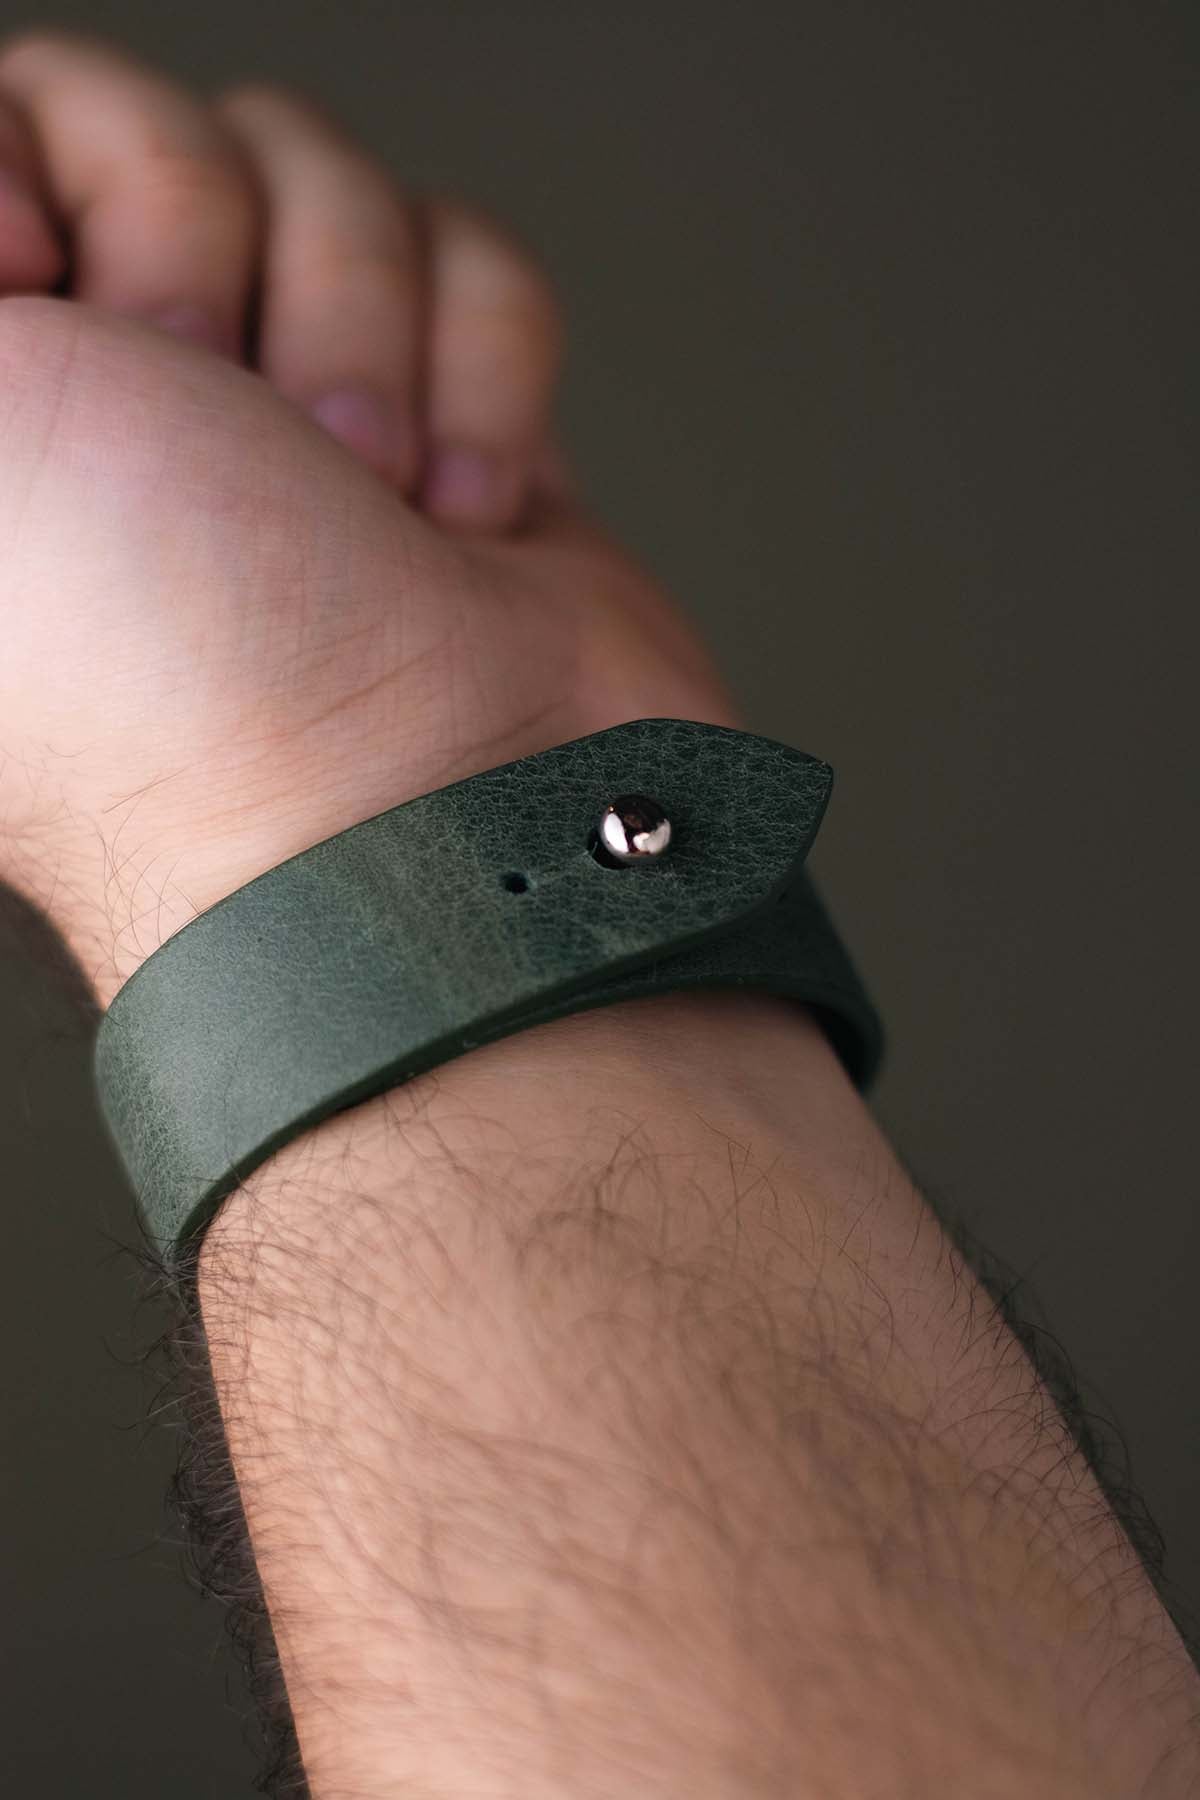 Olive Green Leather Watch Strap - The Hermoso